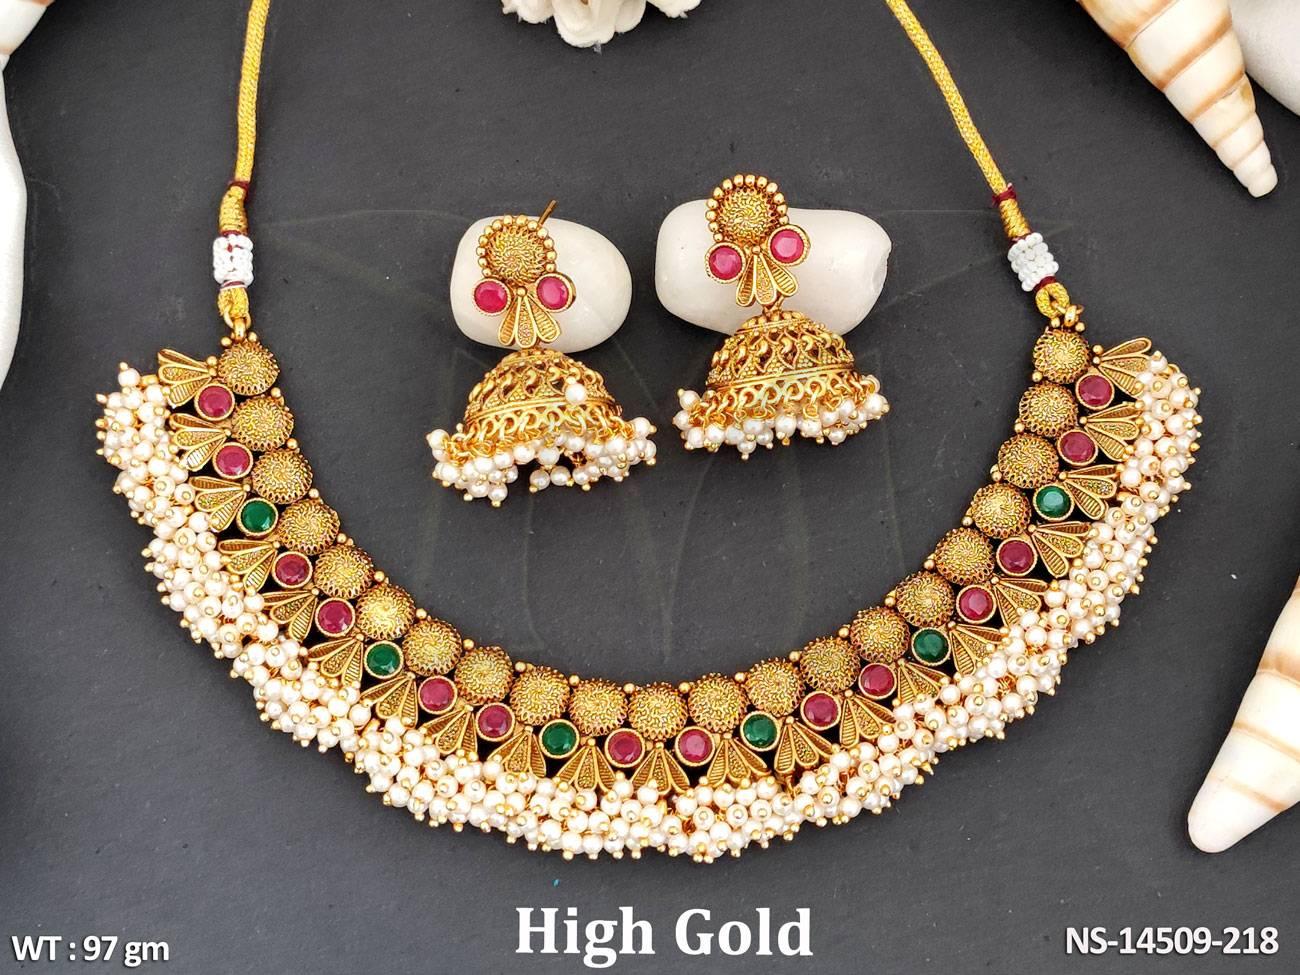 This Antique Jewellery High Gold Polish Clustered Pearl Fancy Style Necklace Set boasts a stunning design with high gold polish and clustered pearls.